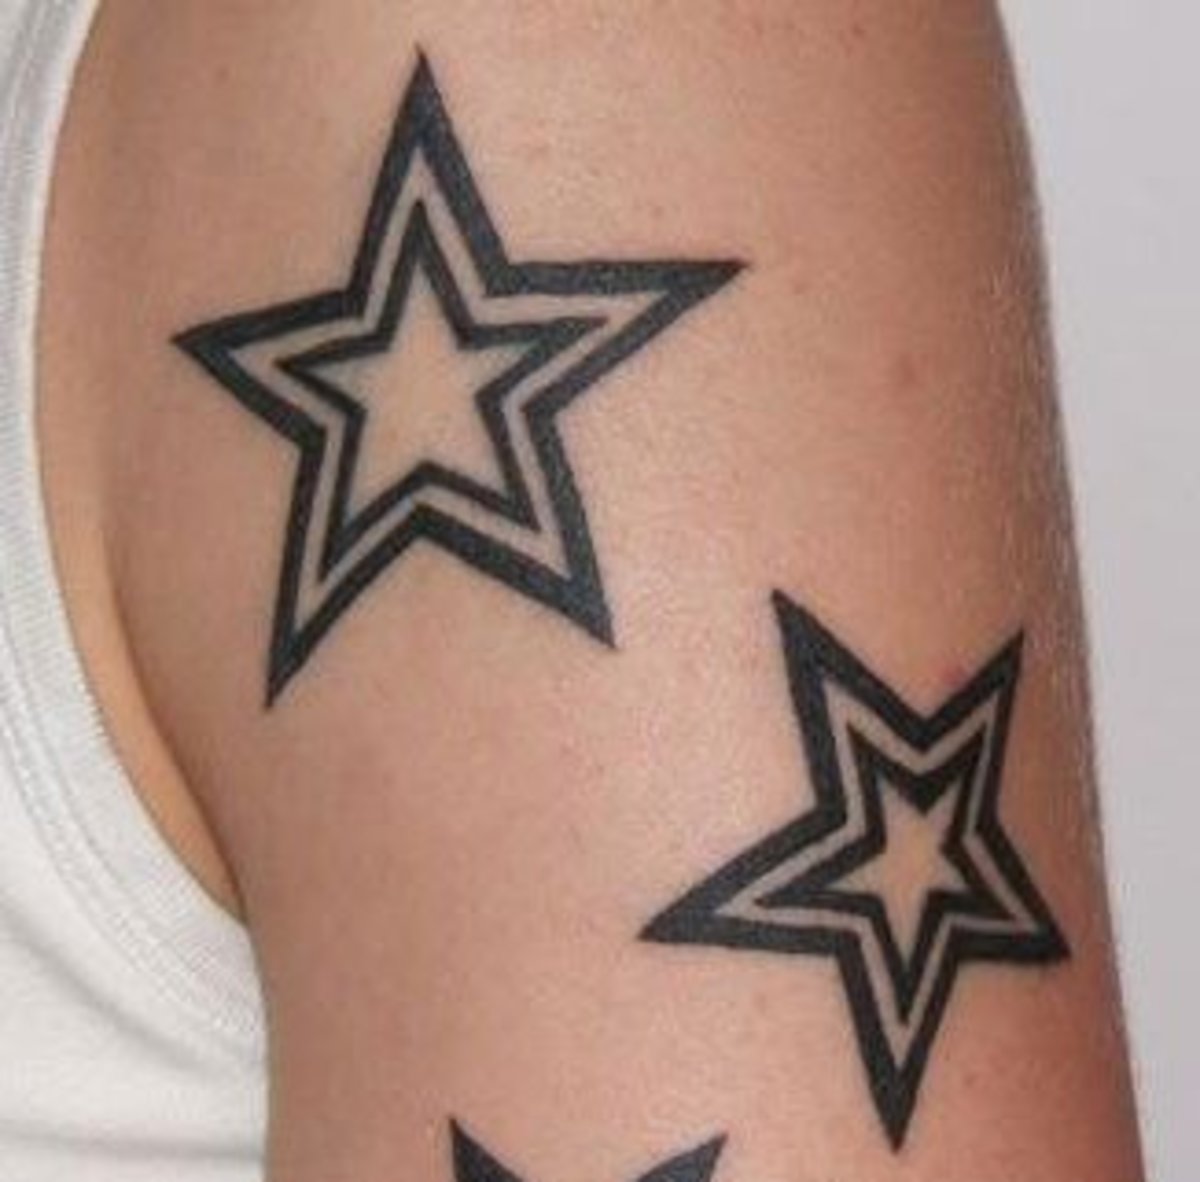 Star Tattoo Meanings Ideas and Pictures TatRing